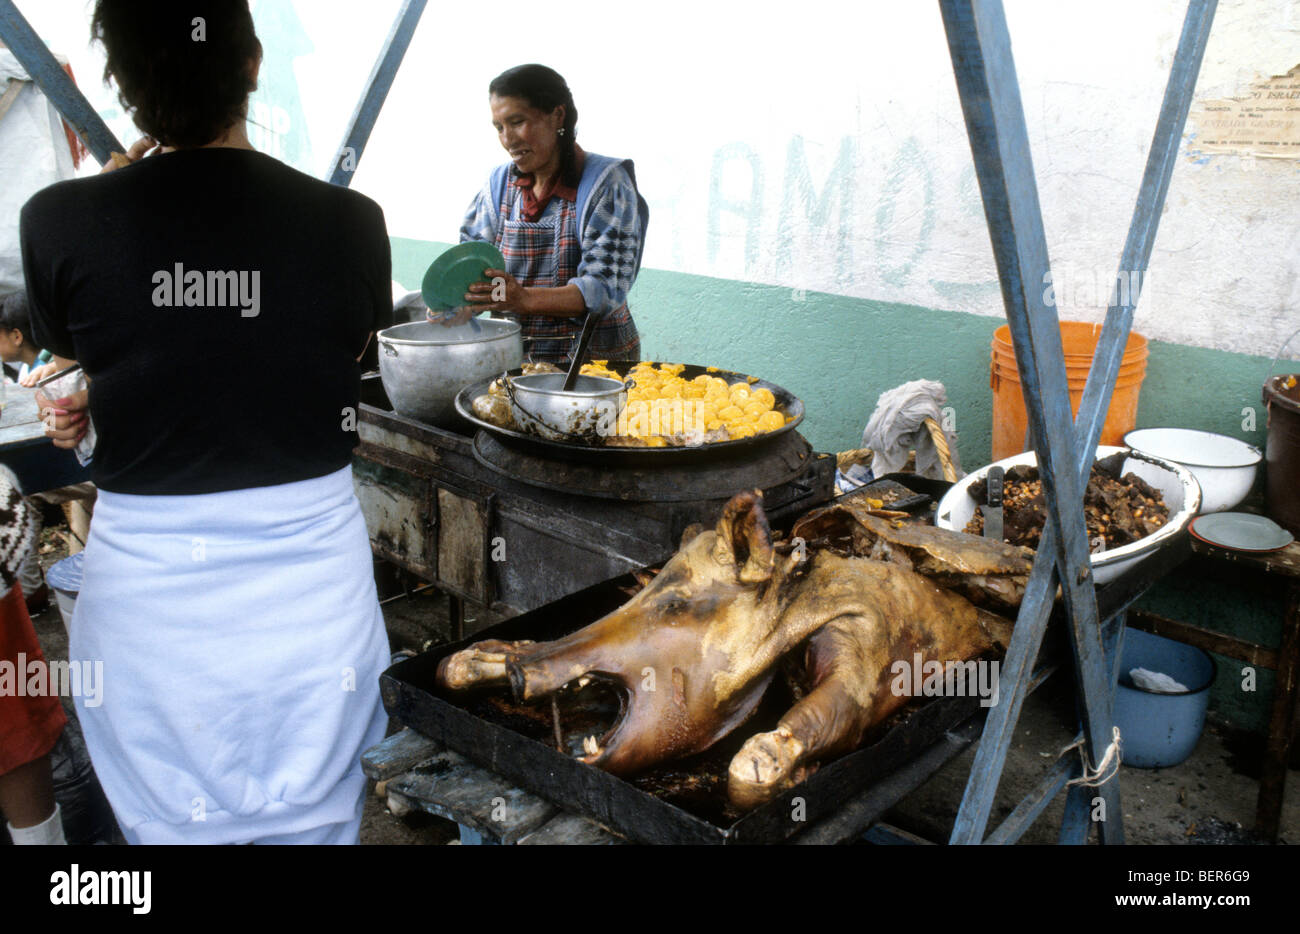 Local ecuadorian delicacy, whole roasted pig laid out on market stall. Stock Photo